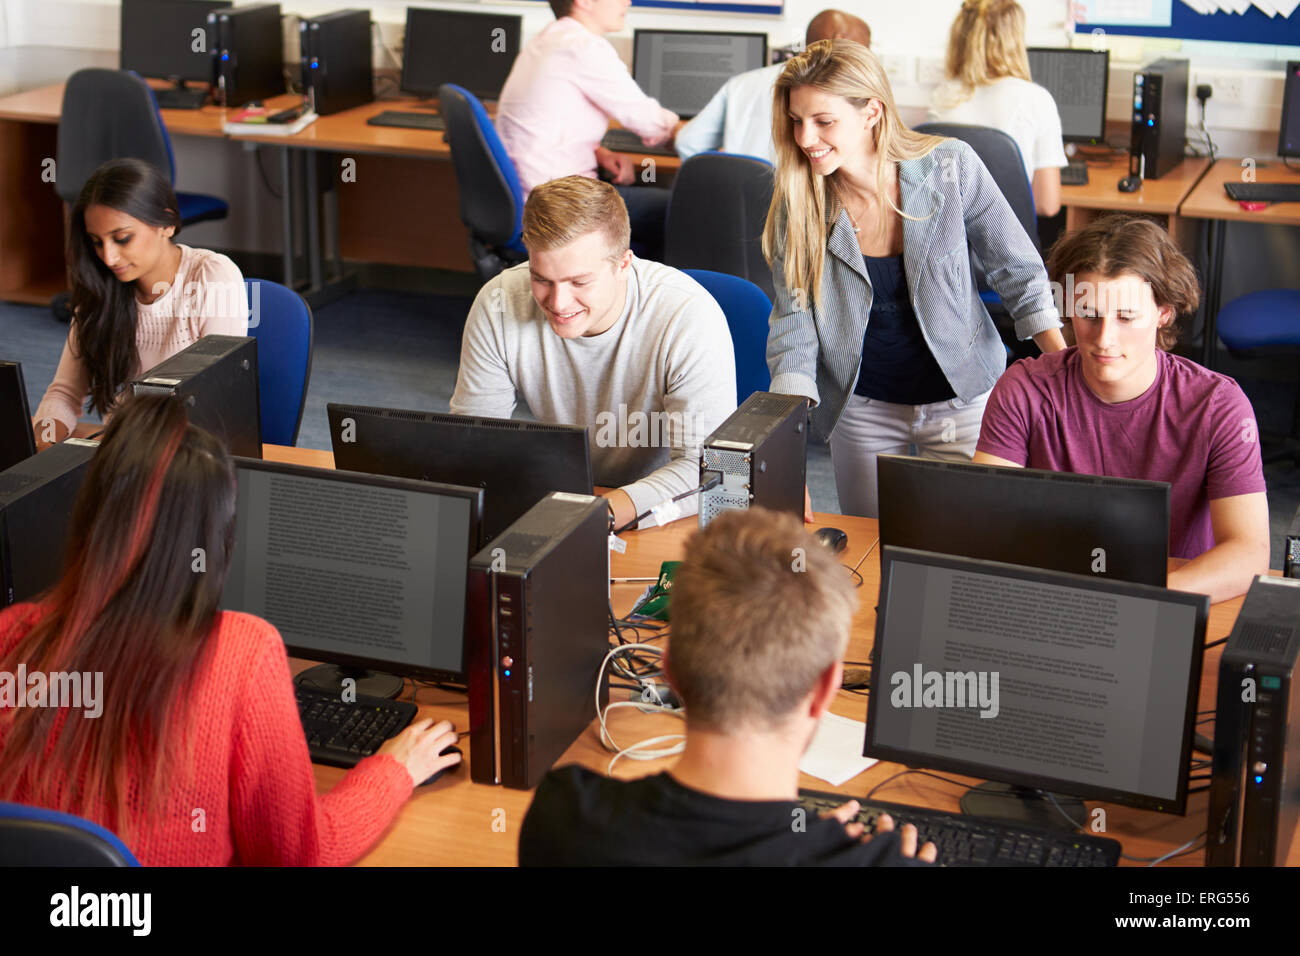 College Students At Computers In Technology Class Stock Photo